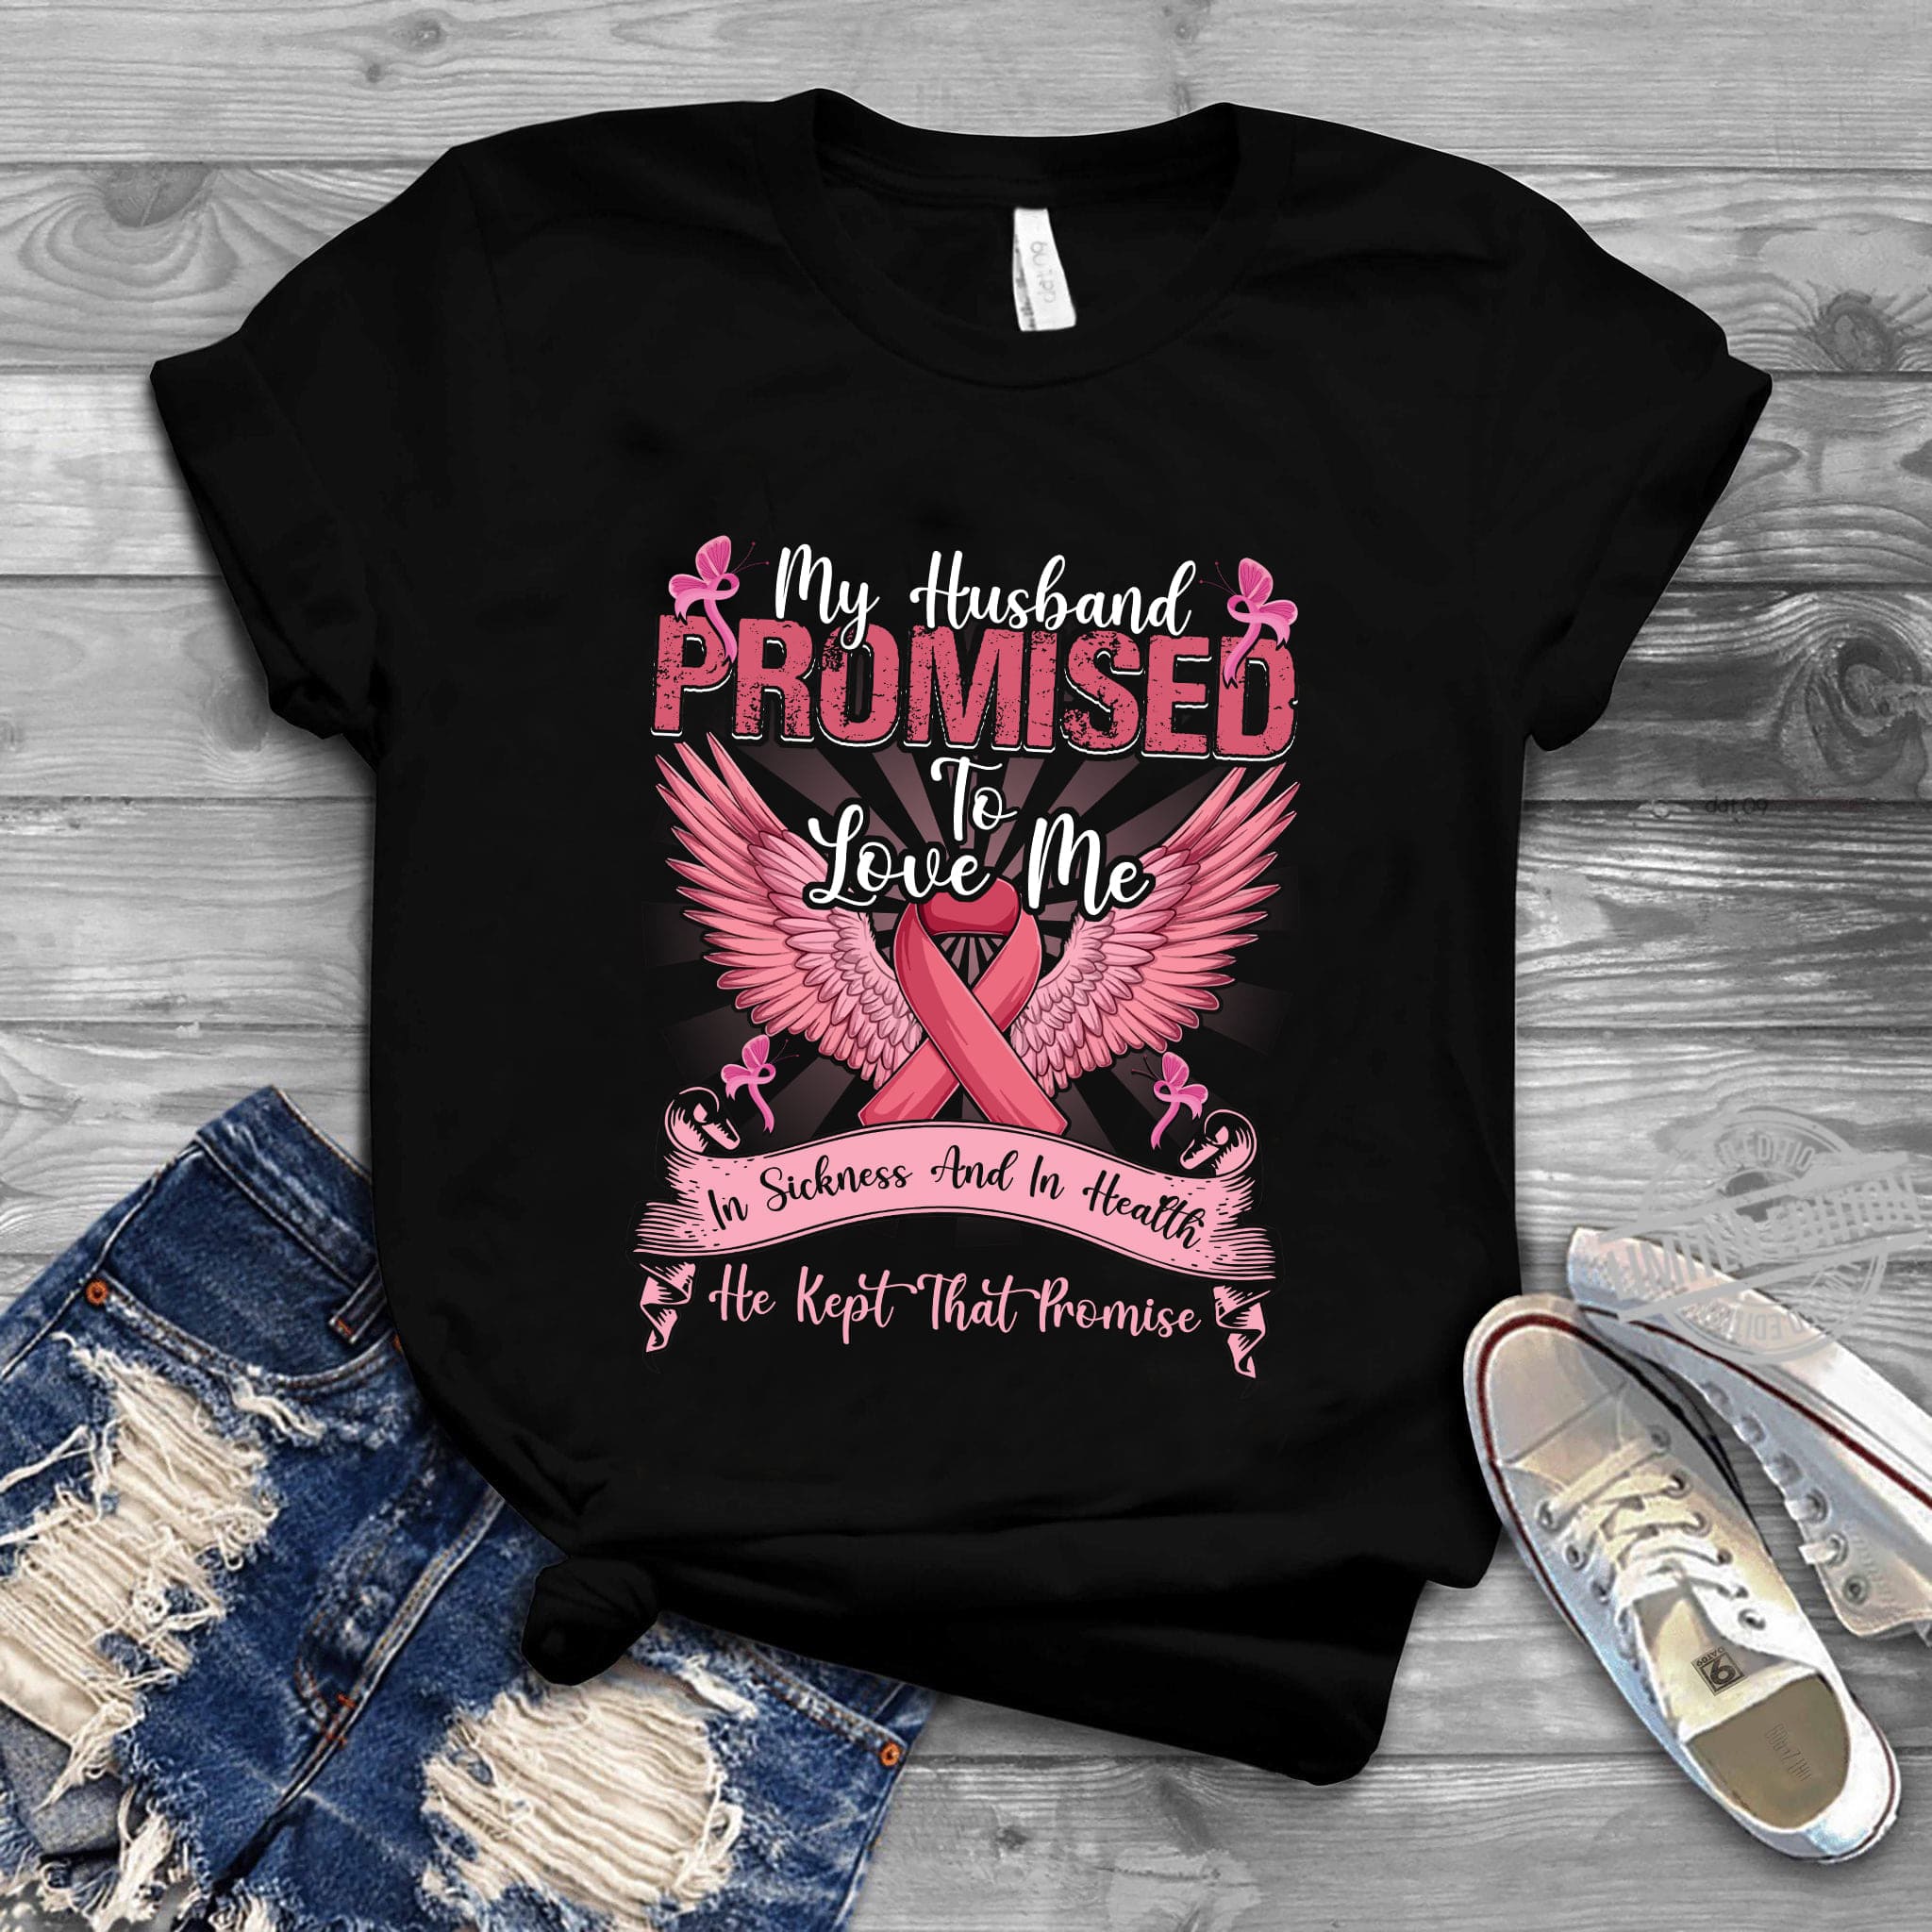 My husband promised to love me in sickness and in health - Husband and wife, Breast cancer awareness